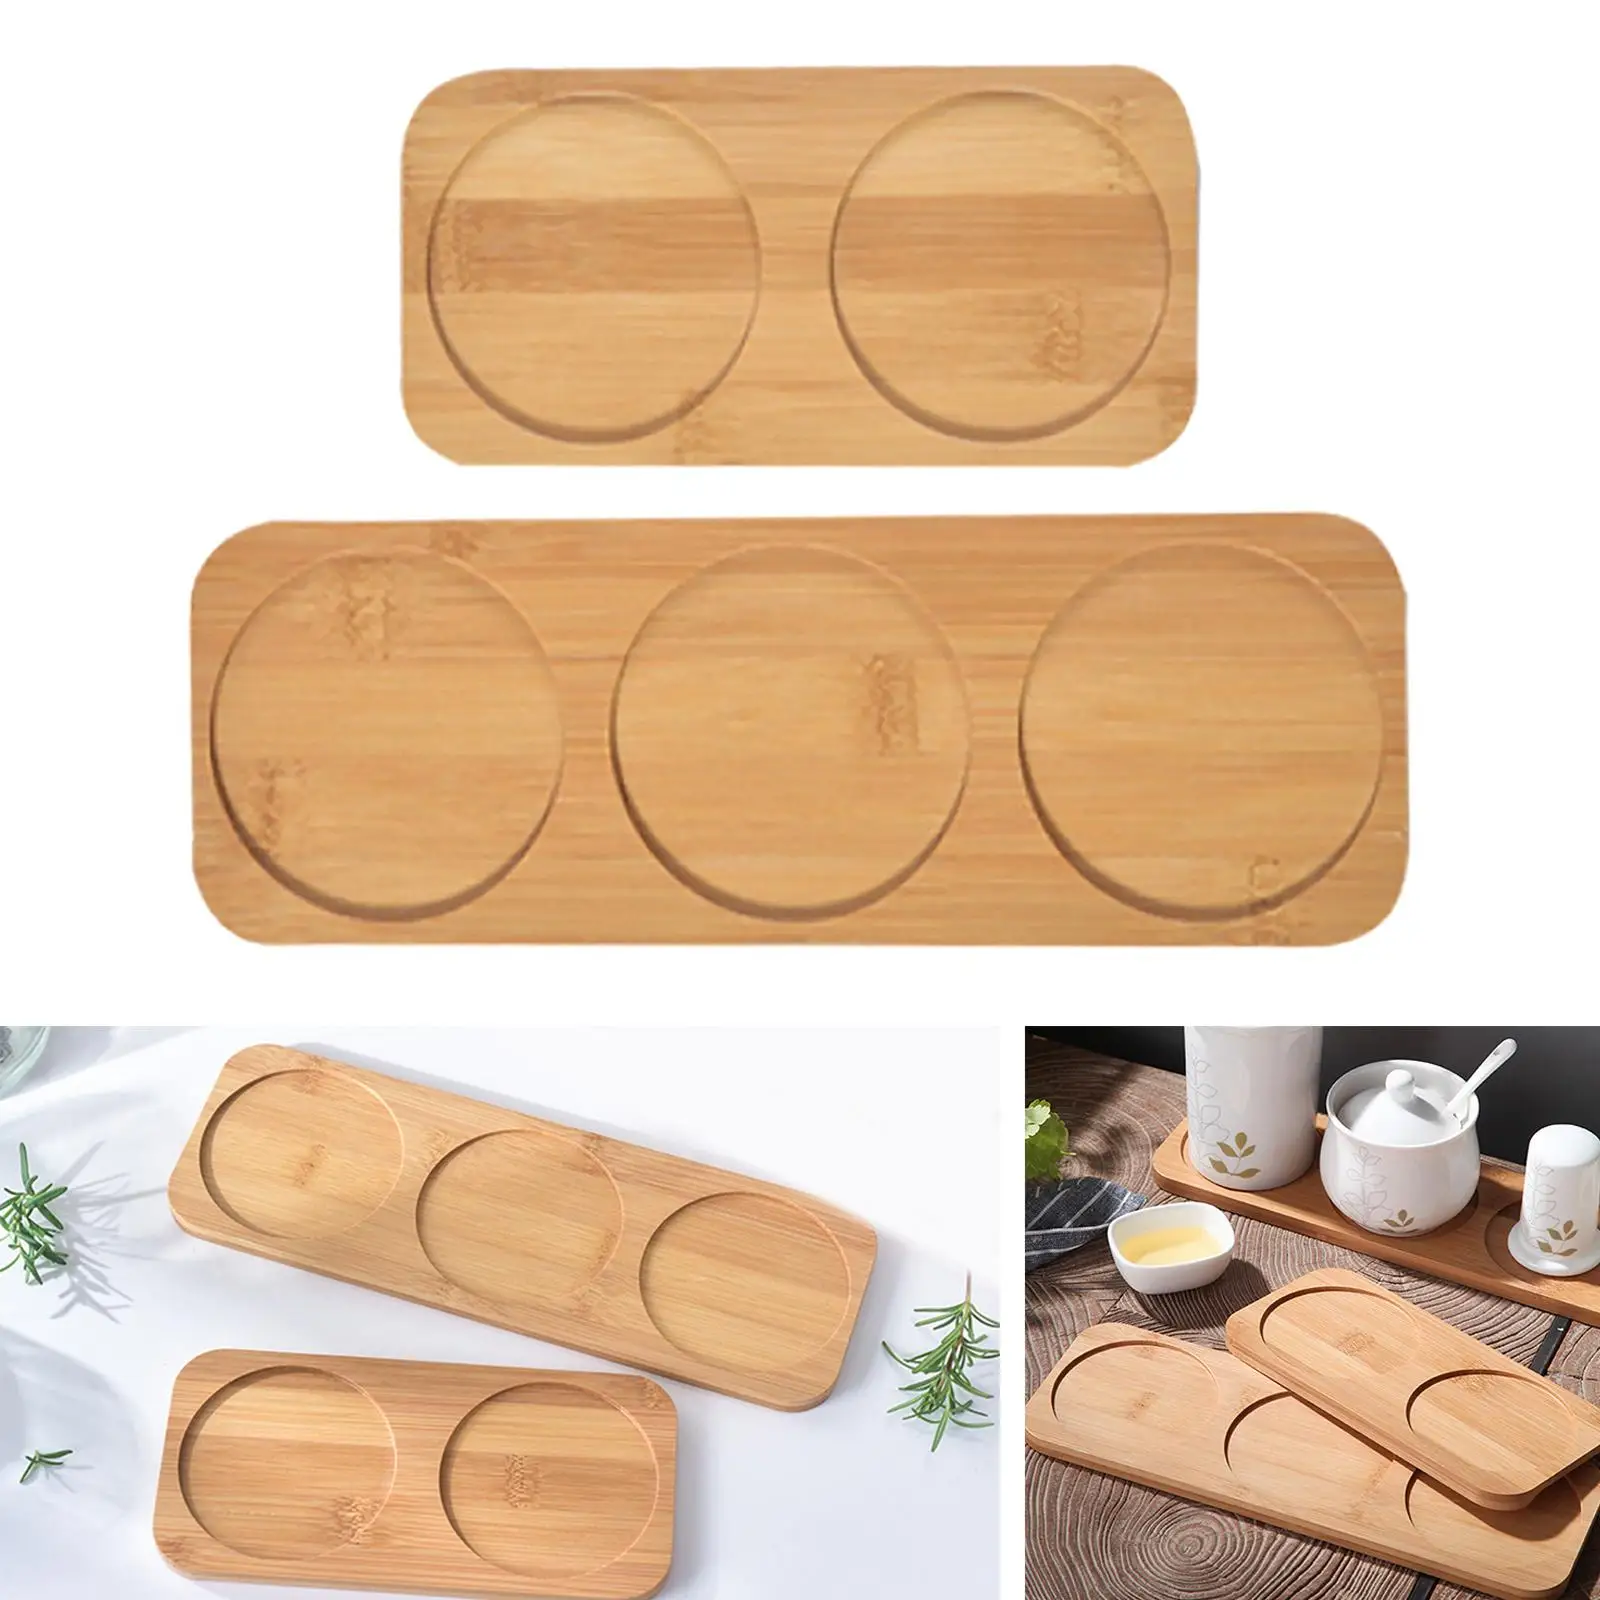 Pepper Mill Tray Rectangular Shape Kitchen Tools Bamboo Wood Wood Tray for Salt Pepper Spice Deli Boards Party Displays Picnics